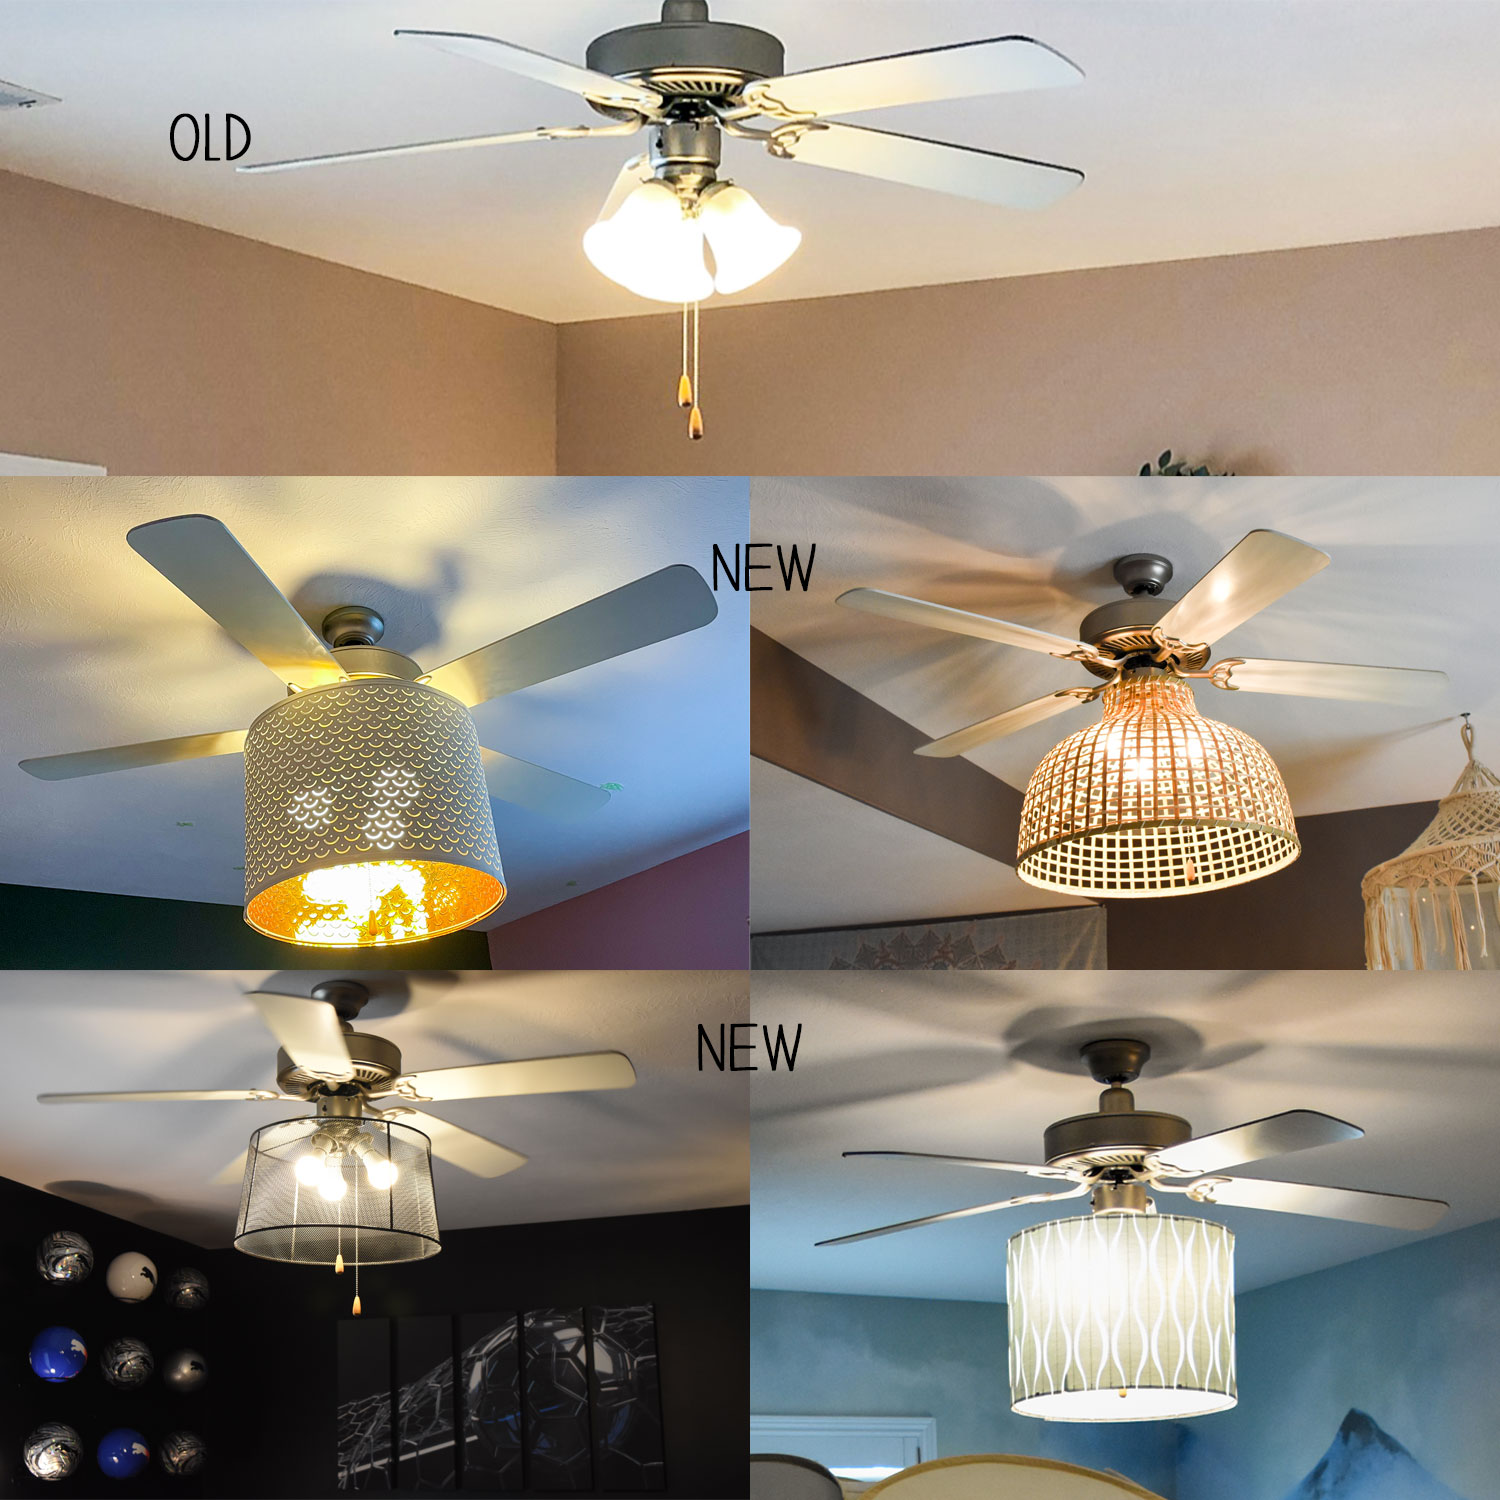 How to Upgrade an Old Ceiling Fan